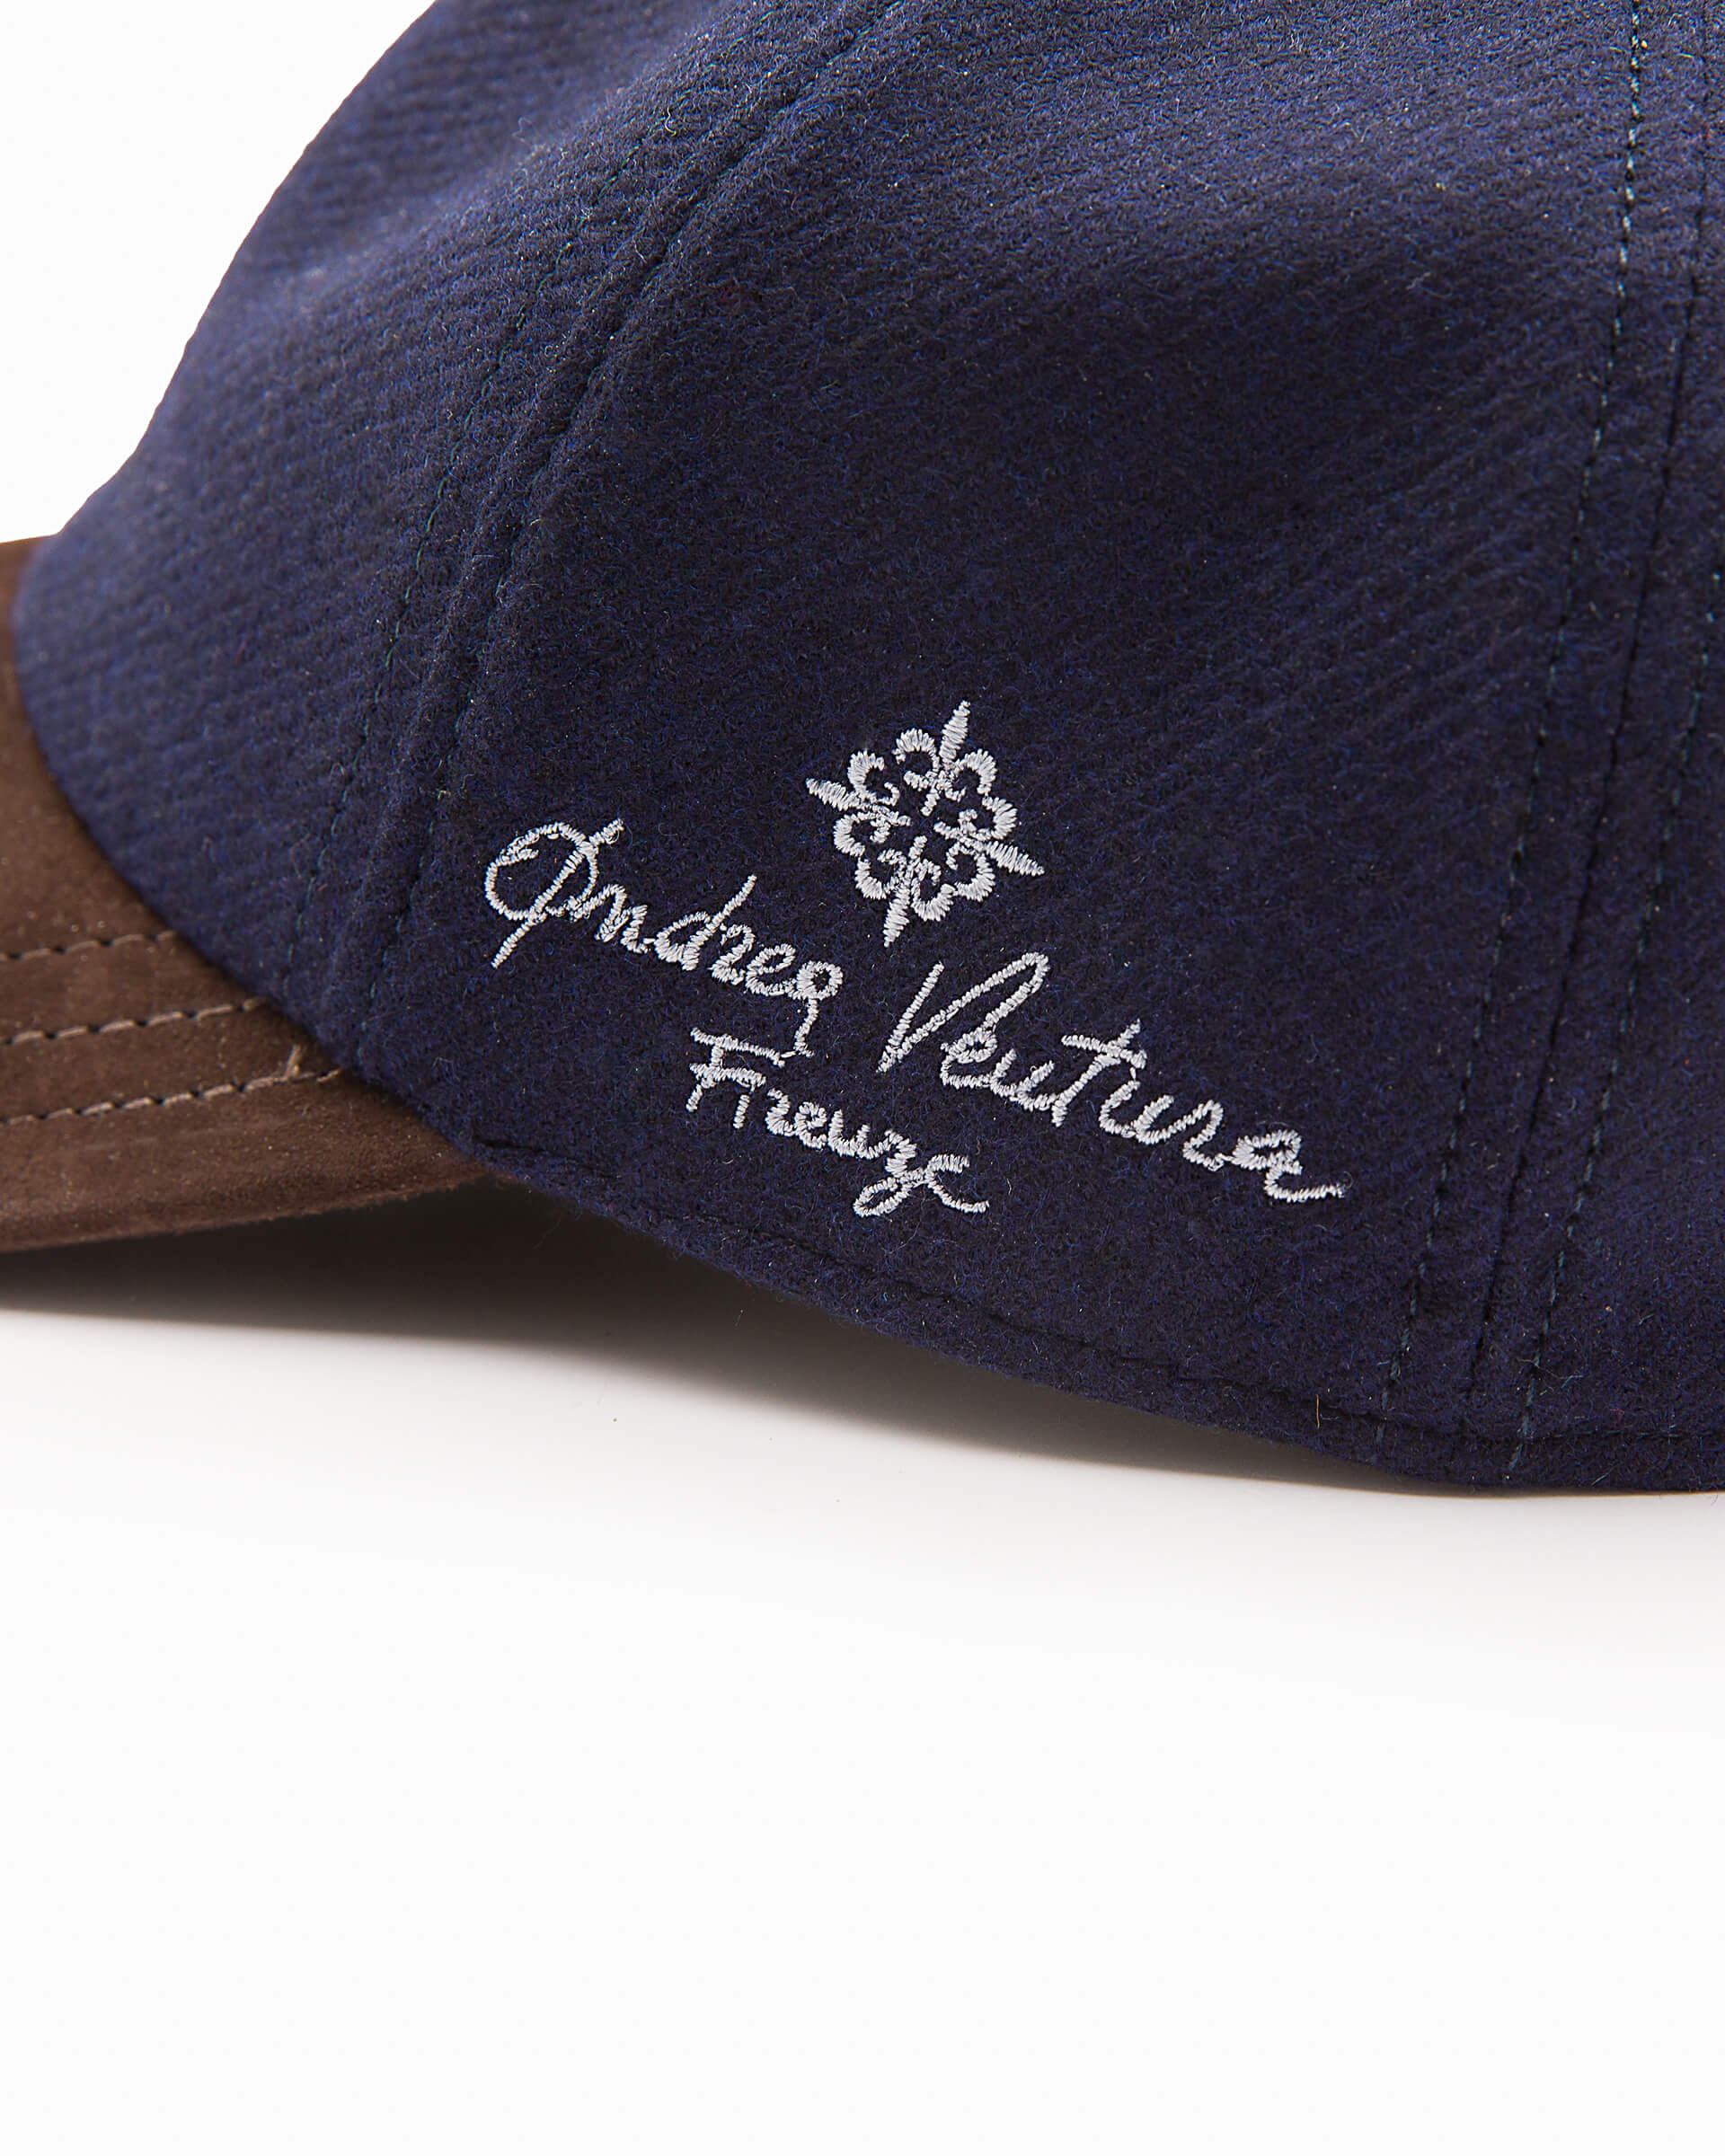 visor water-repellent made Baseball hat with Firenze - of cashmere Ventura blue cap Andrea eclipse